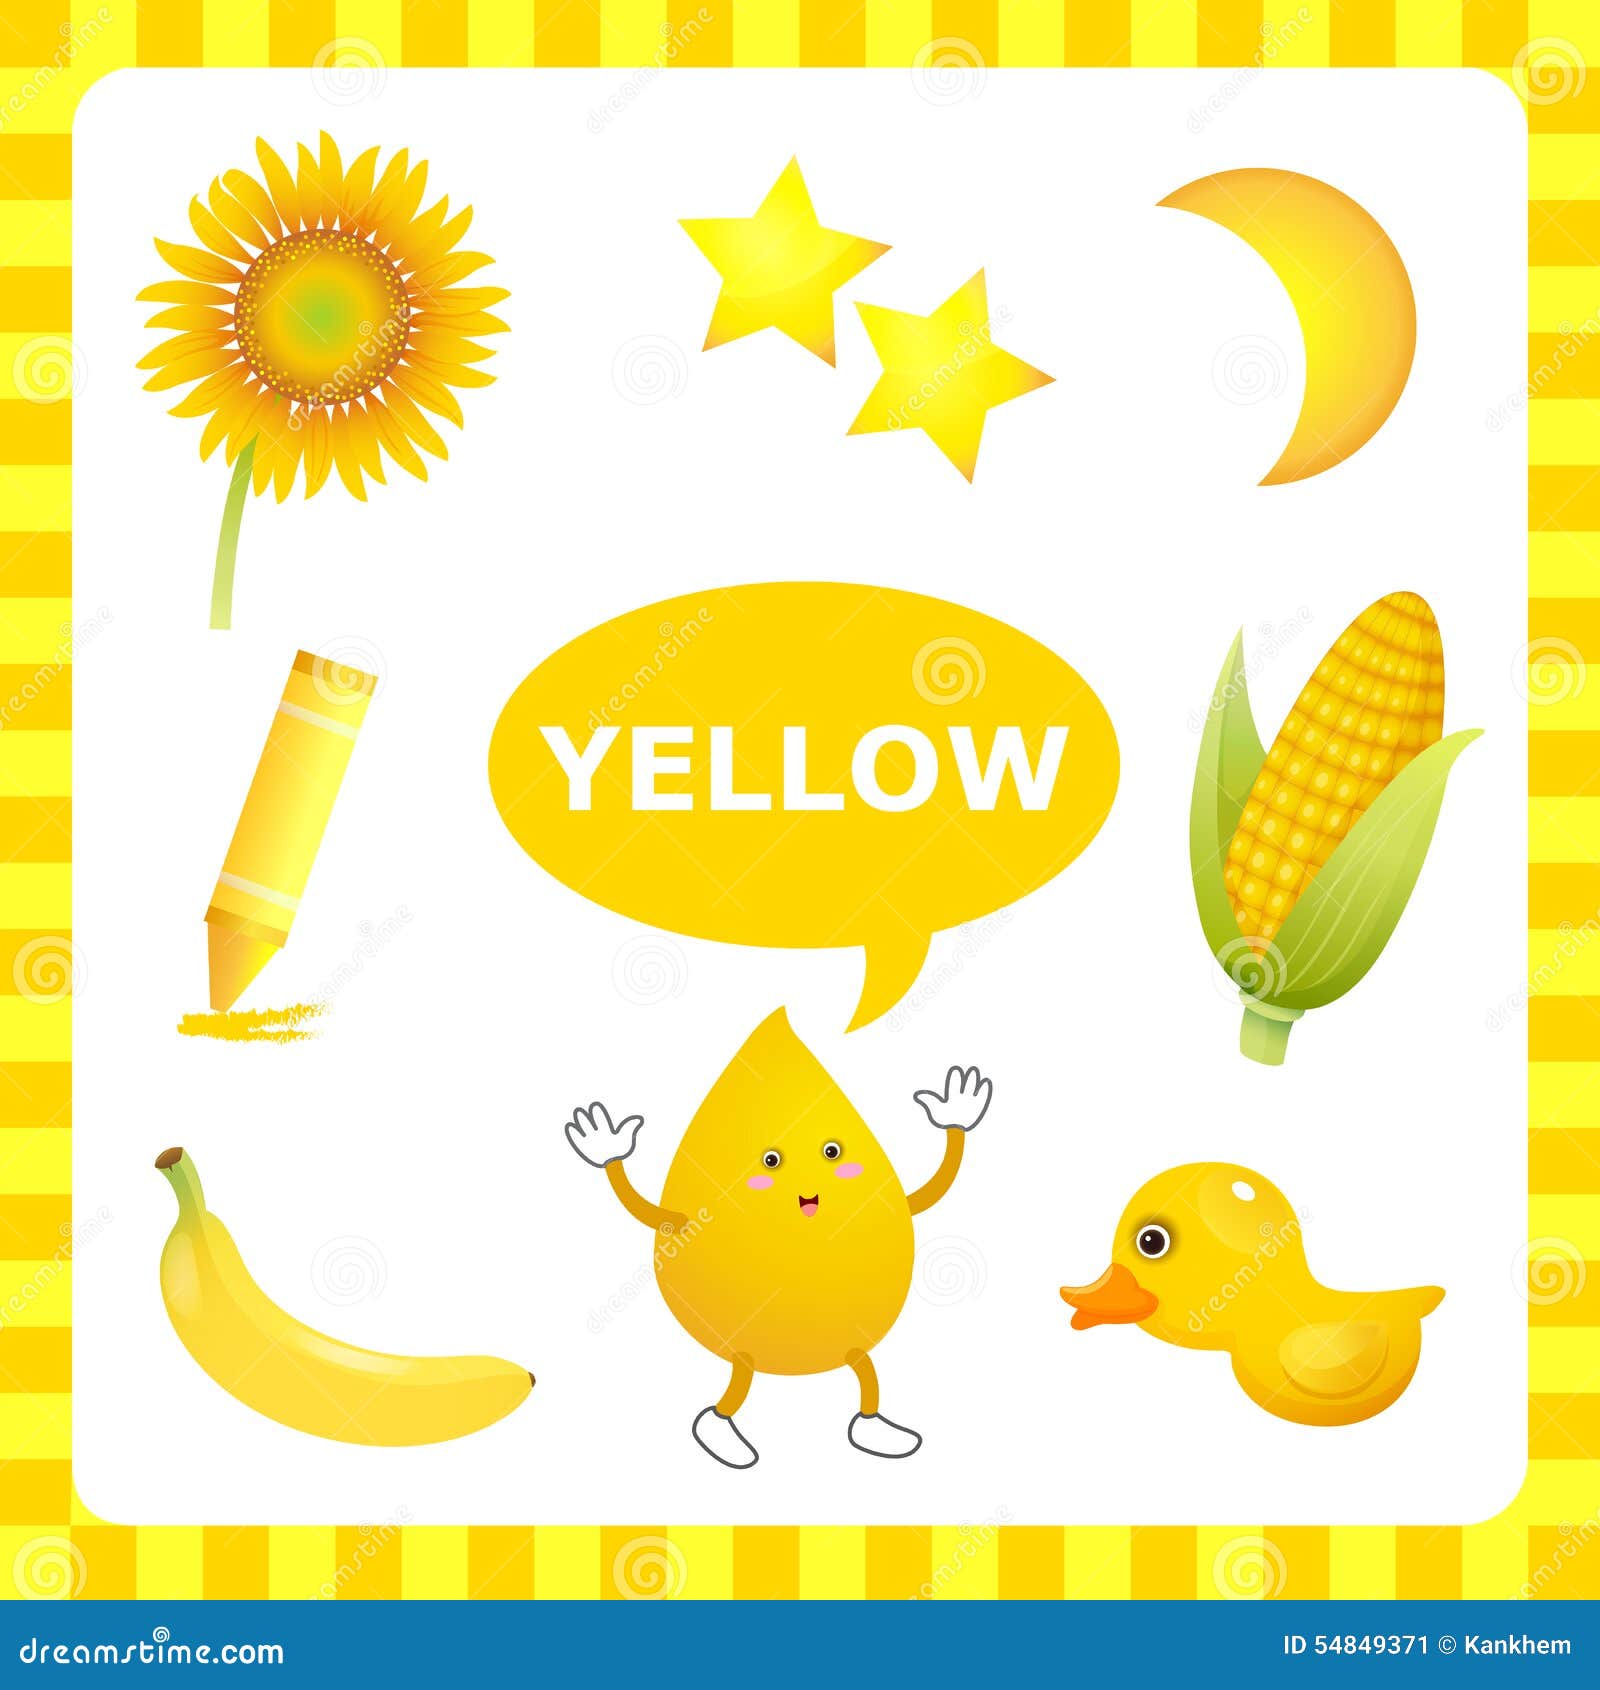 clipart yellow objects - photo #18